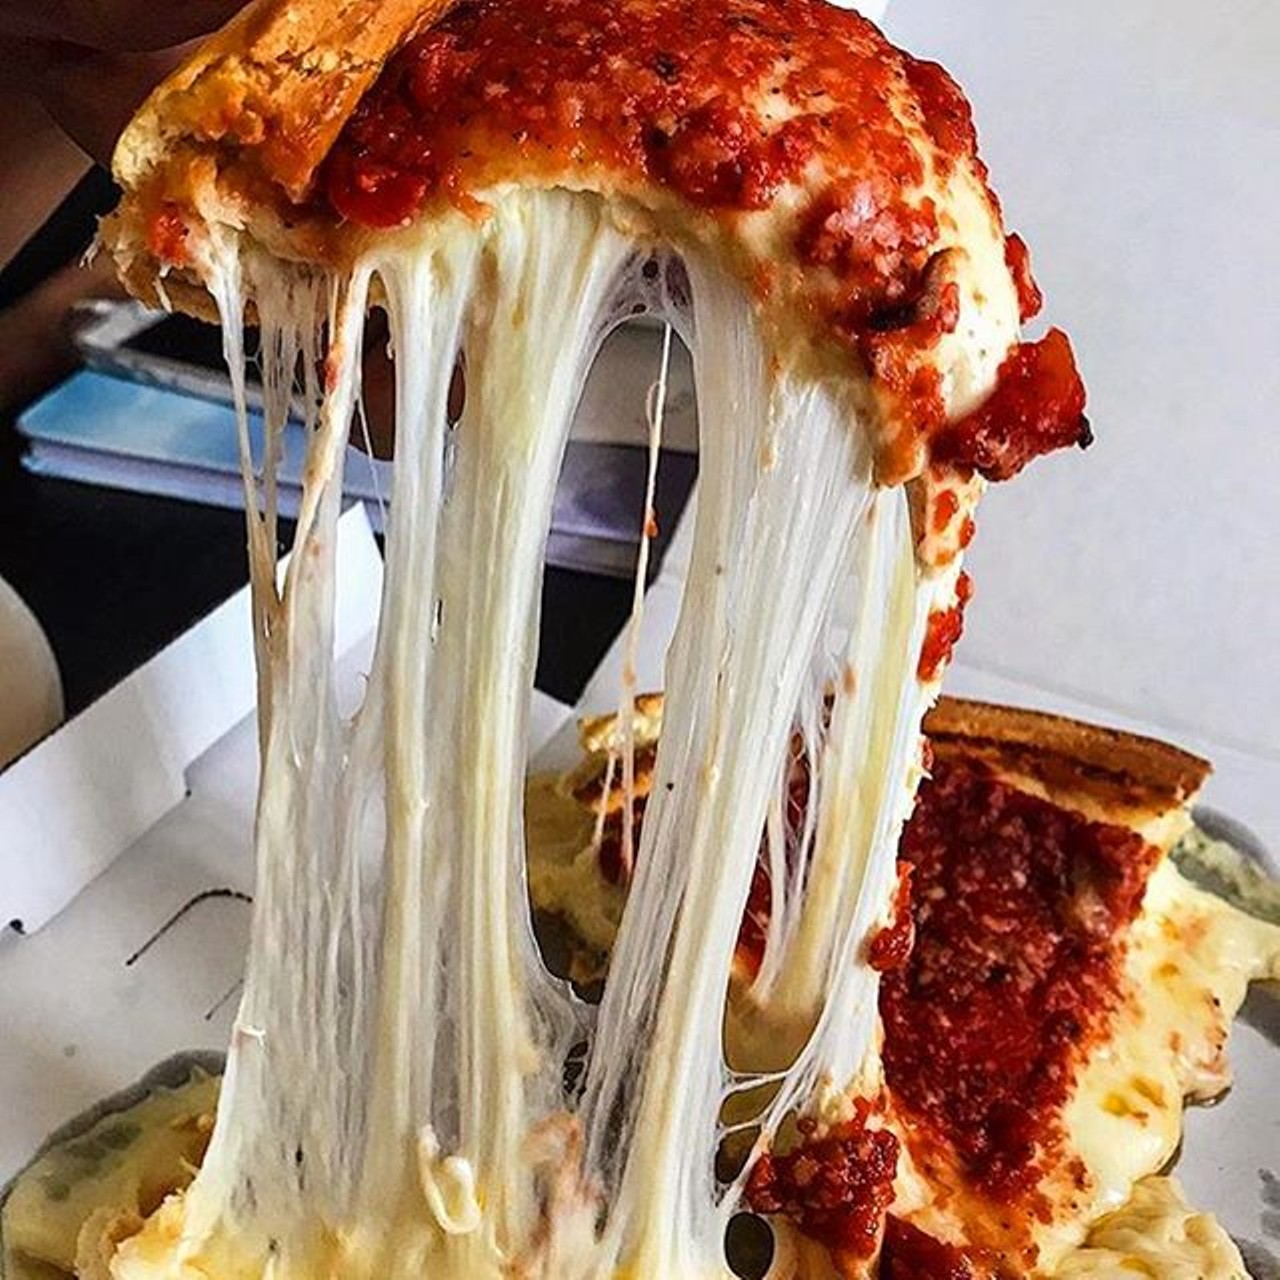 Must try:The Chicago styled deep dish pie.
Photo via Instagram user @eatforcheap